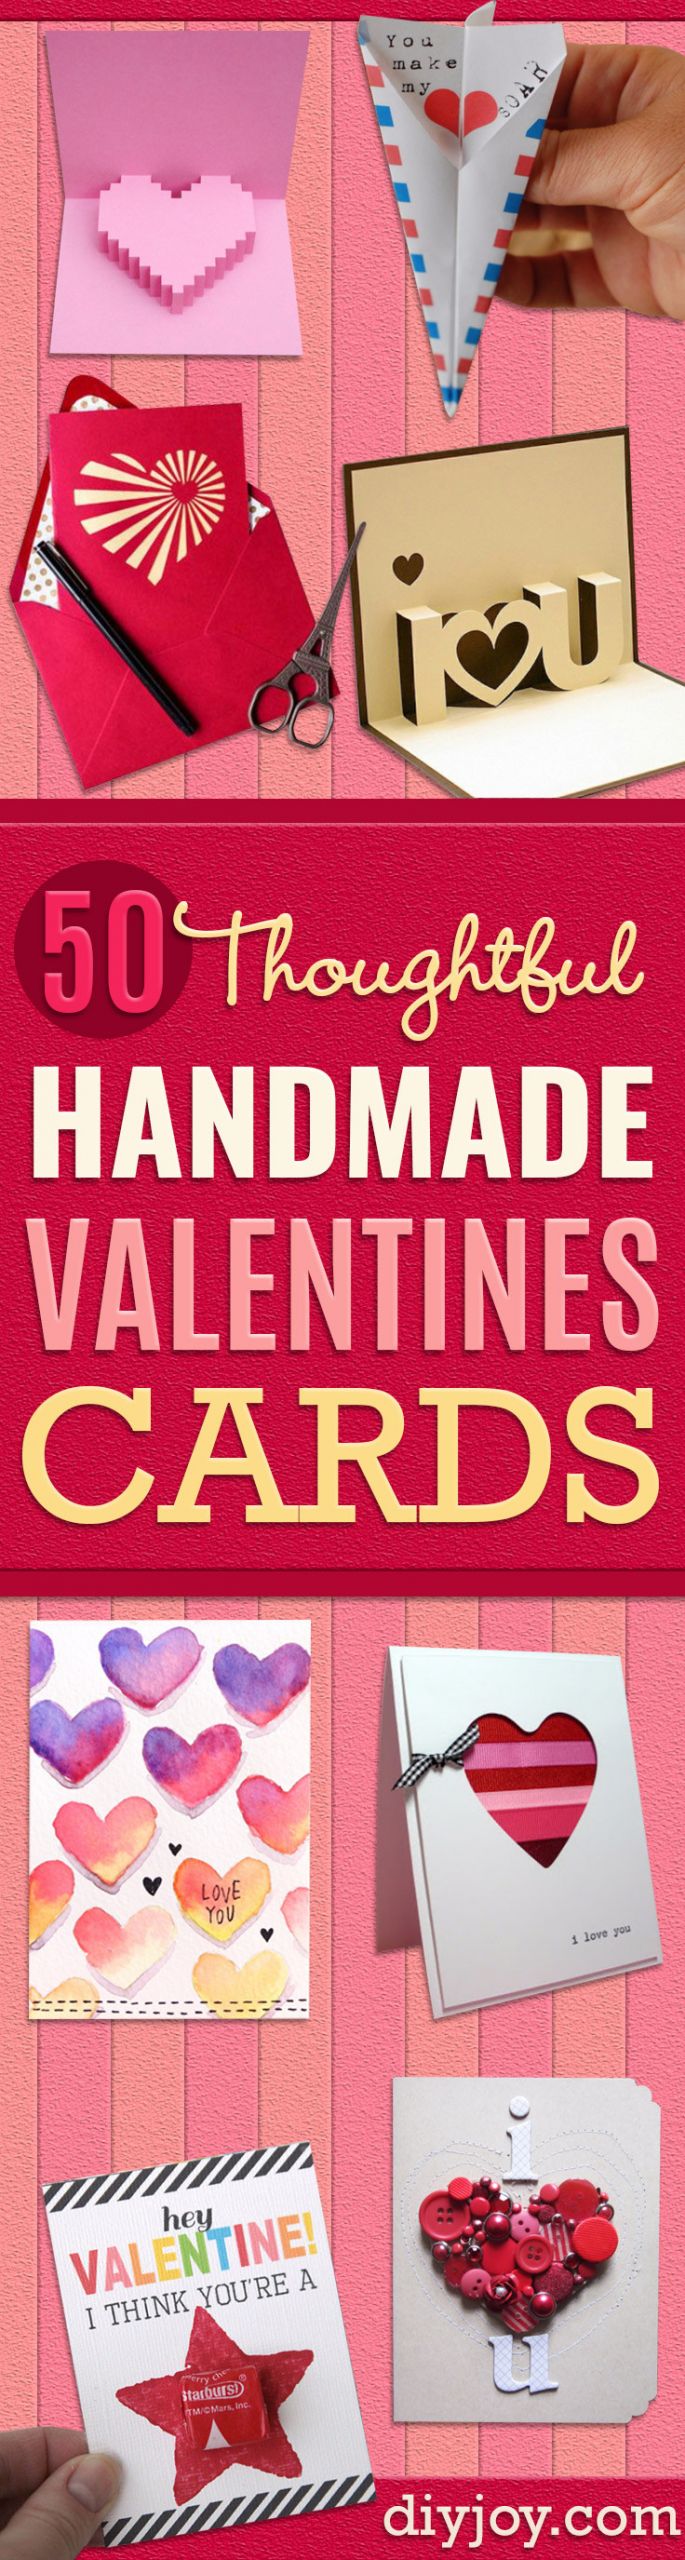 Valentines Day Gifts Cards
 50 Thoughtful Handmade Valentines Cards